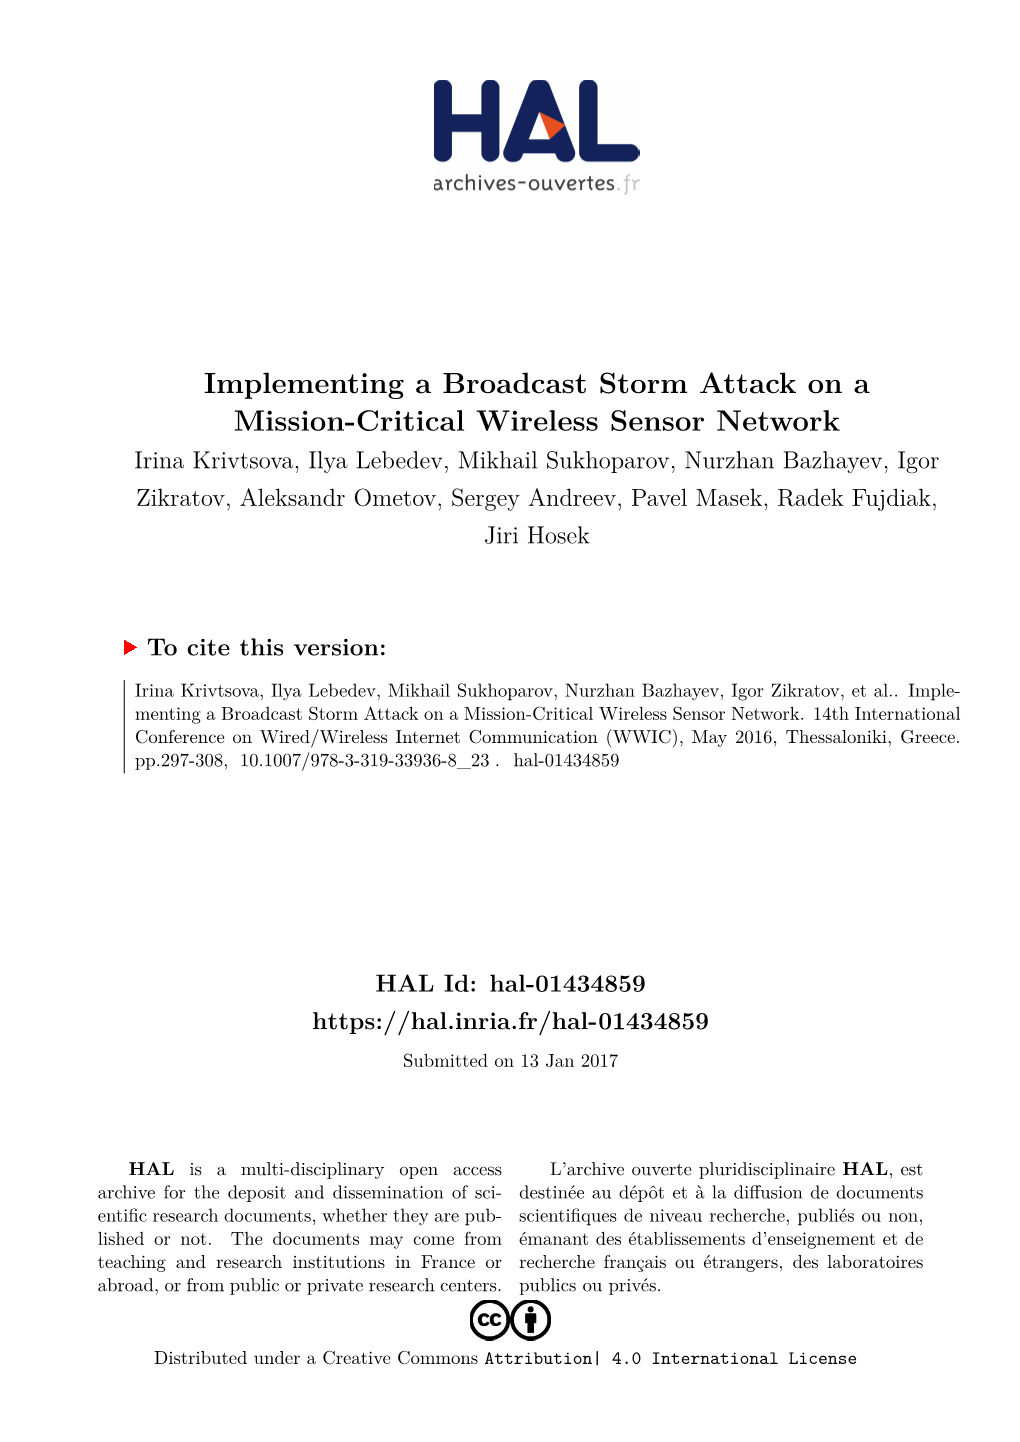 Implementing a Broadcast Storm Attack on a Mission-Critical